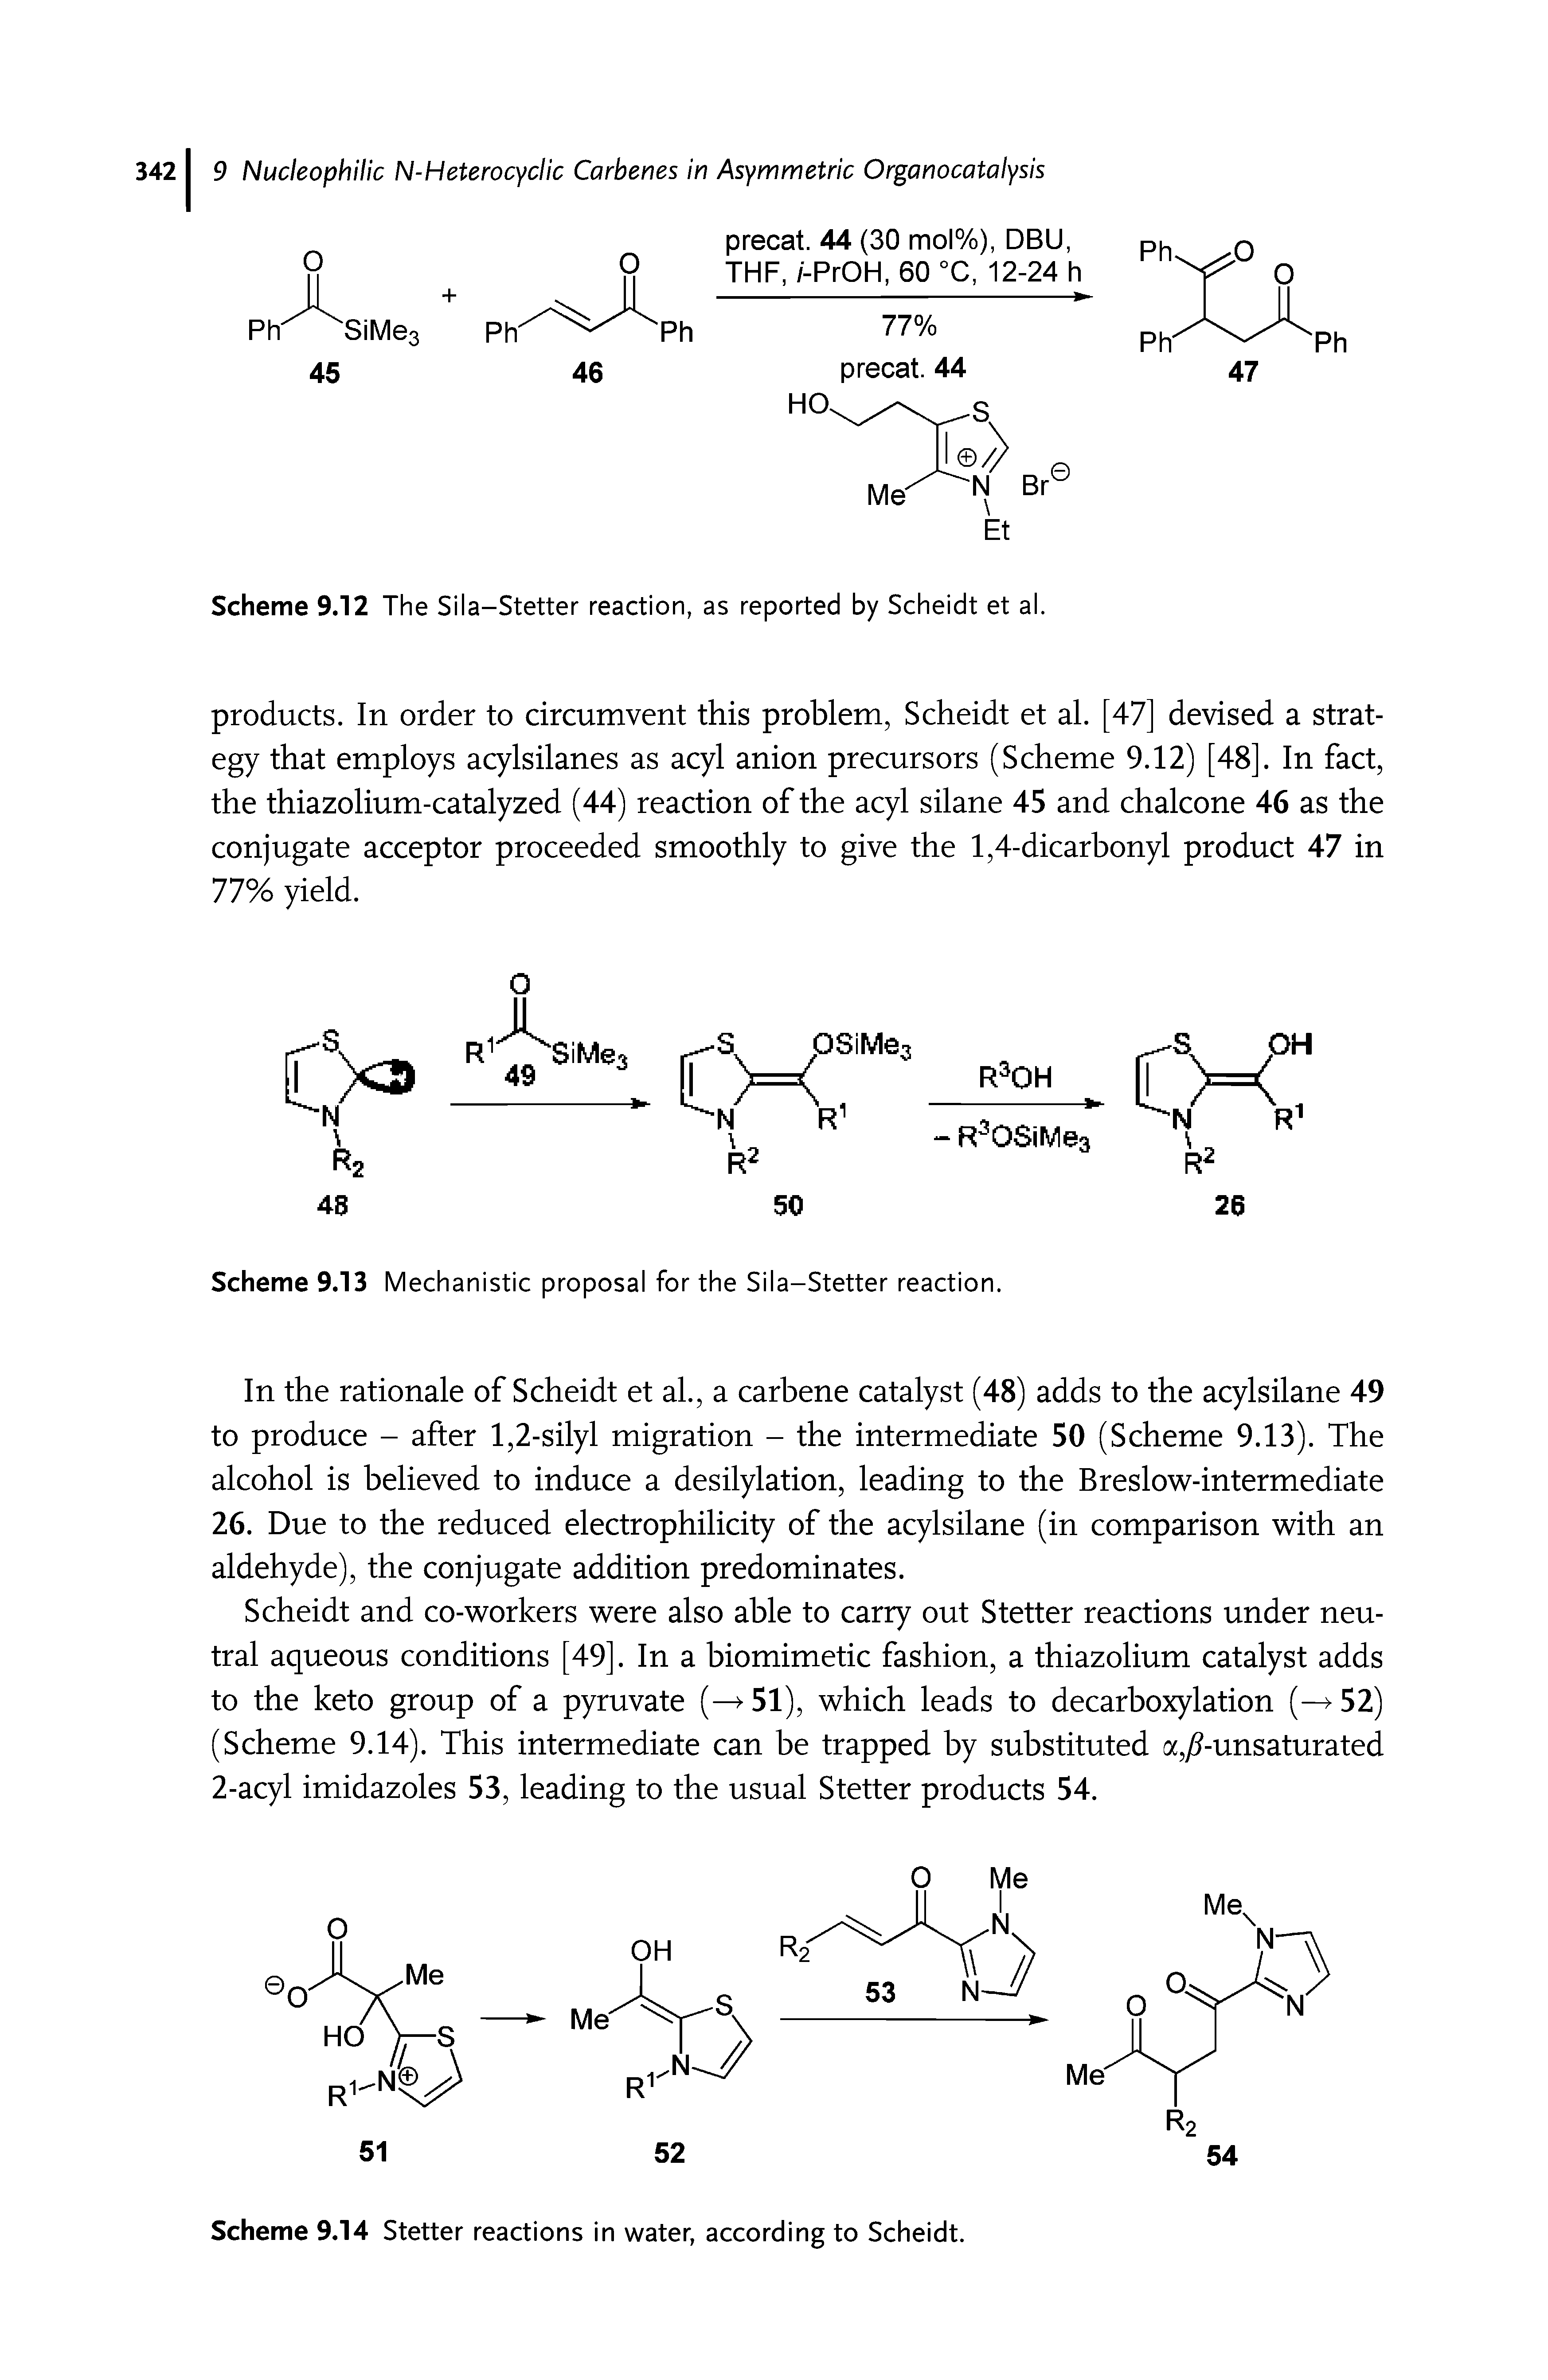 Scheme 9.13 Mechanistic proposal for the Sila-Stetter reaction.